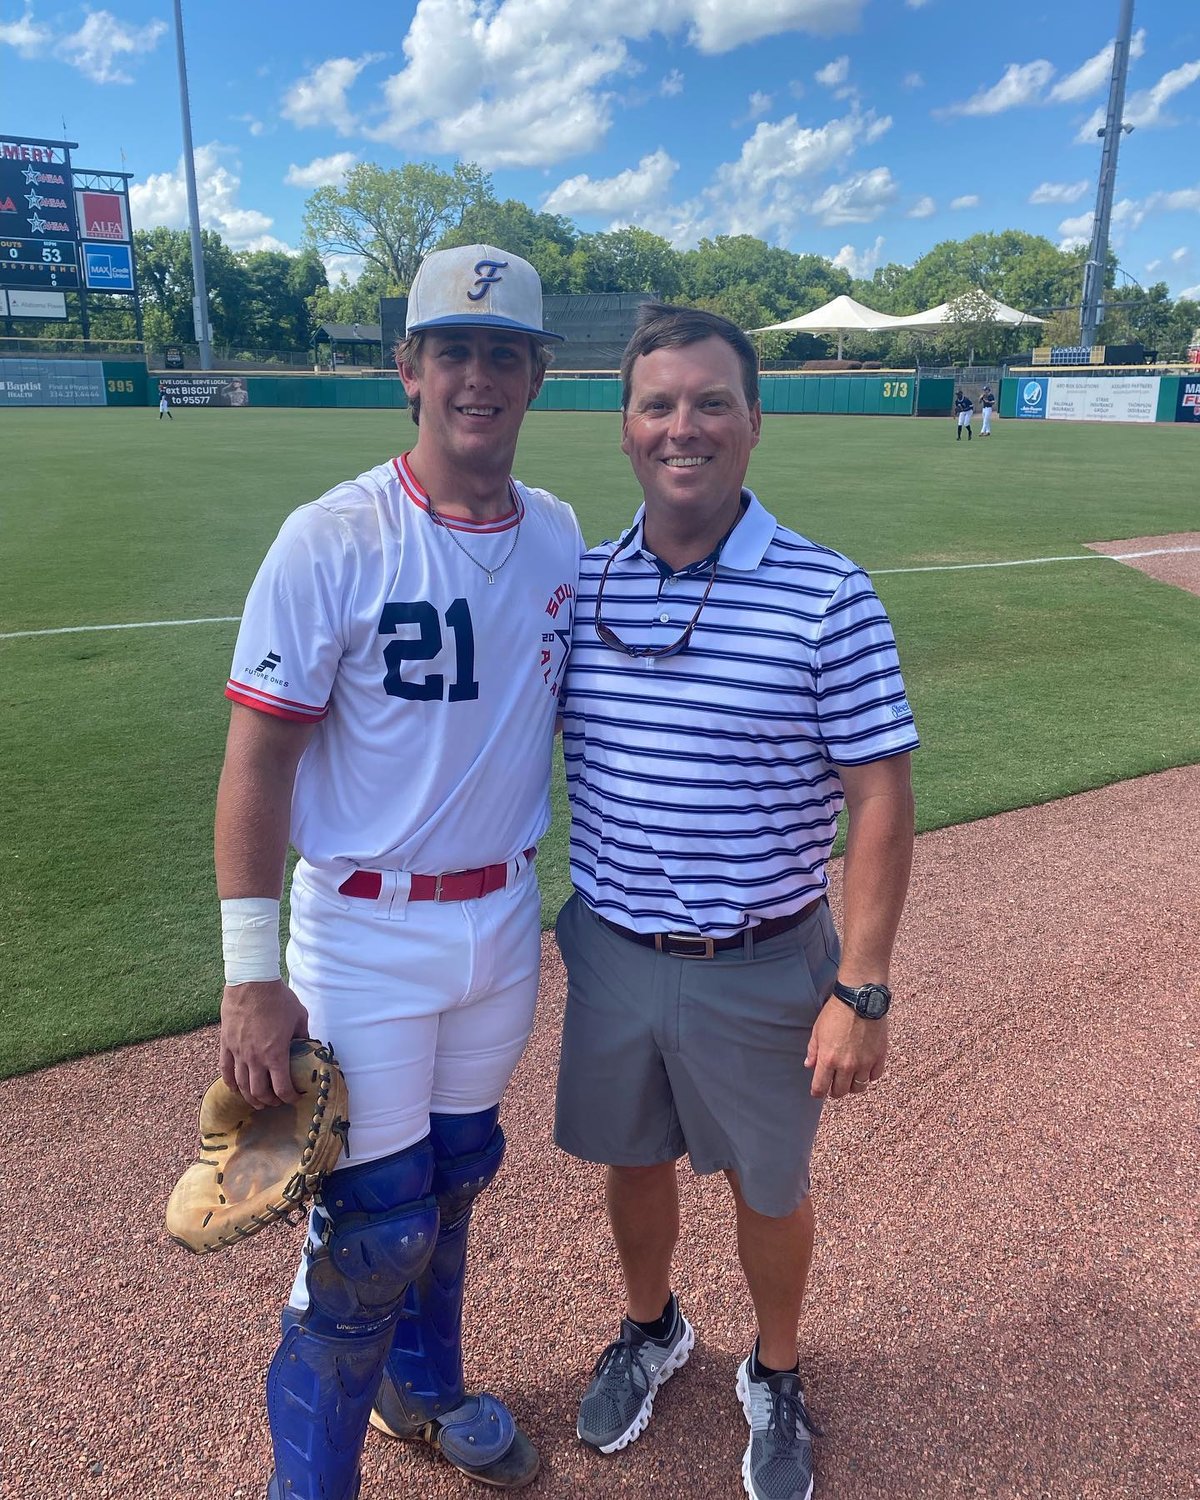 Fairhope’s Hollon Brock was joined by new head coach Kyle Hunter at the Alabama High School Athletic Association’s North-South All-Star Game last Monday, July 18.